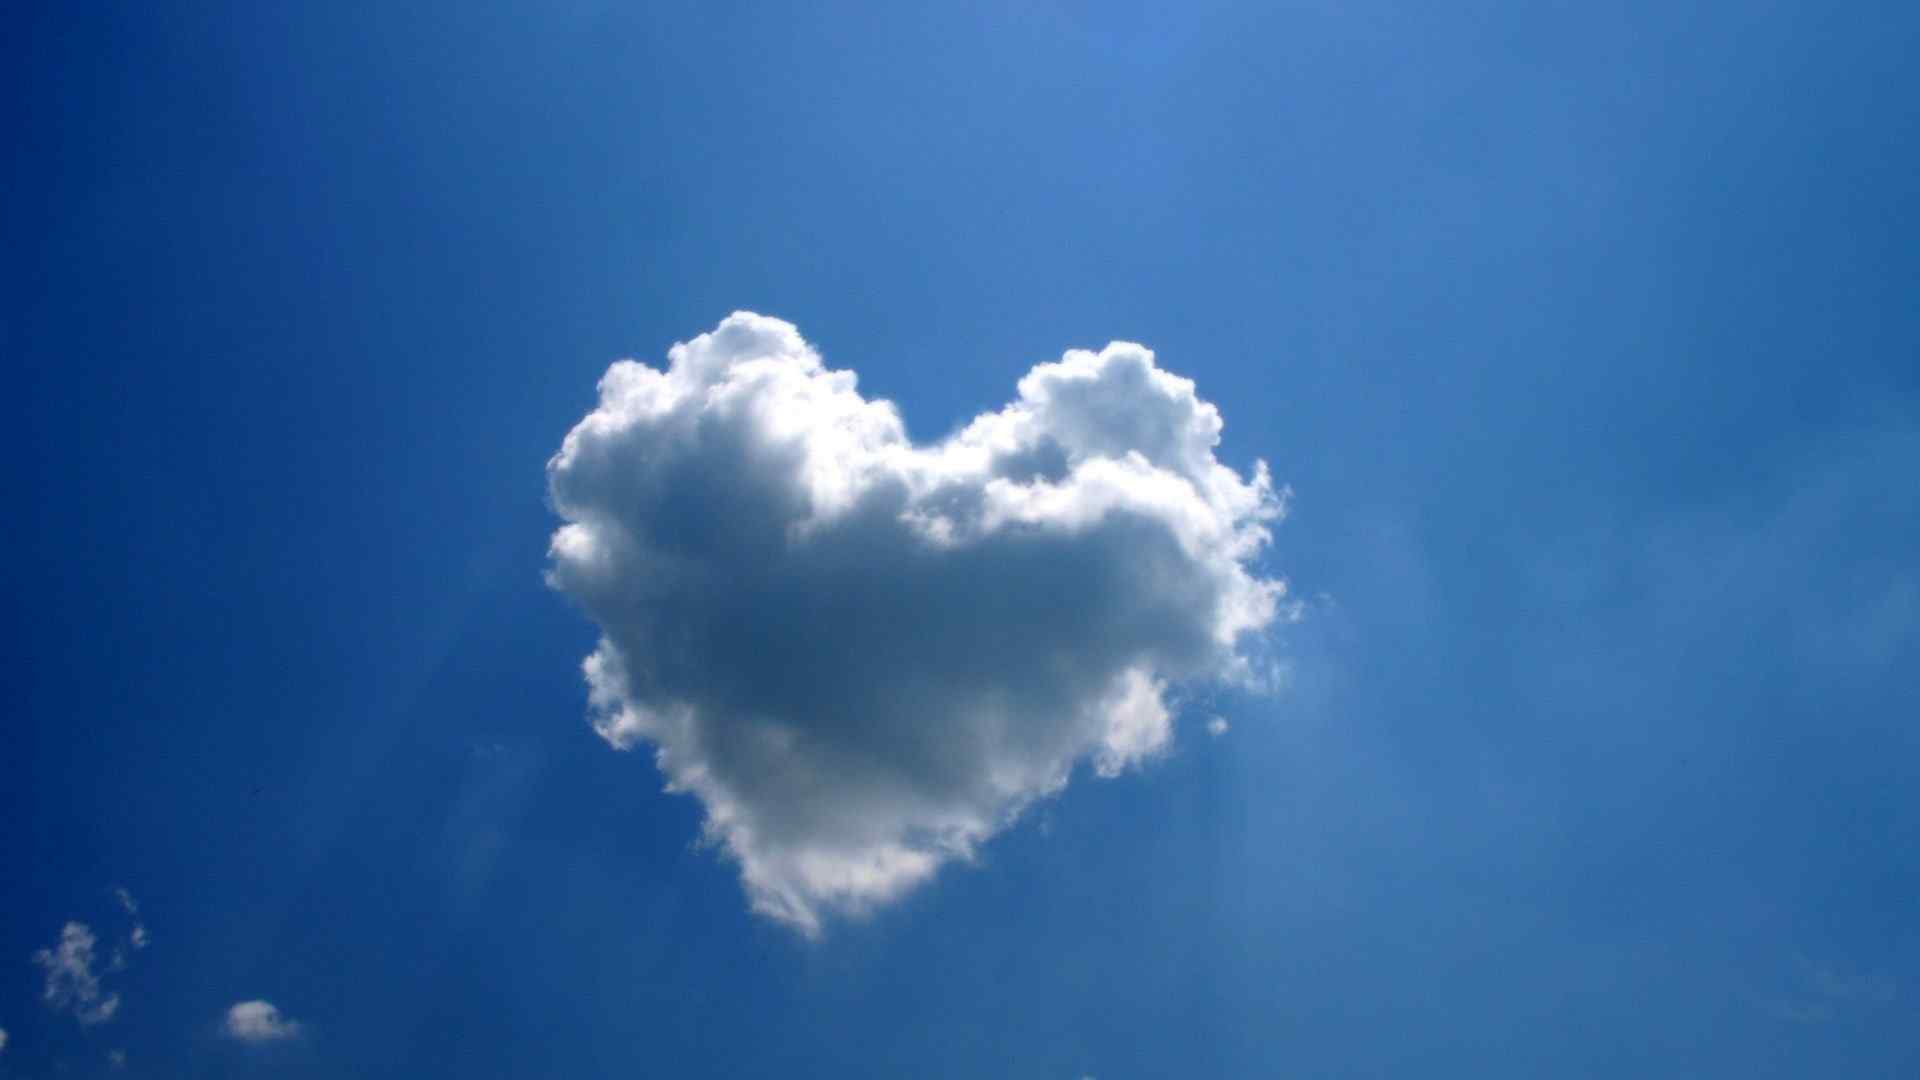 Heart Shaped Cloud 07 of 57 - Romantic Freebies Images with Animated ...